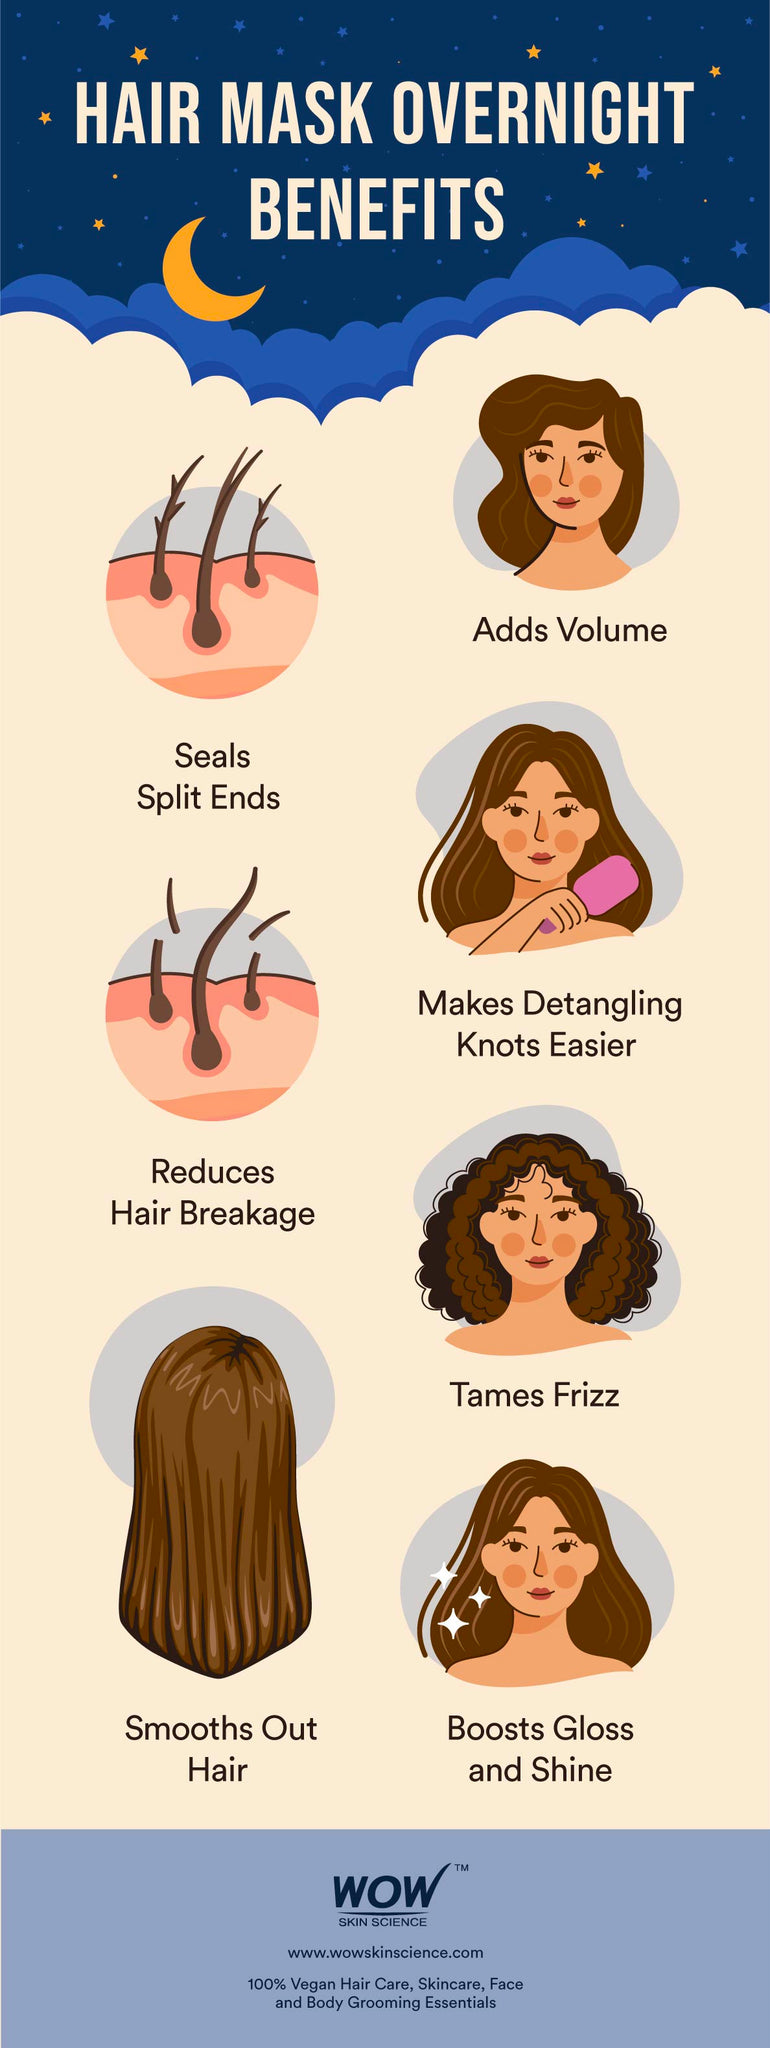 How to Use a Hair Mask Overnight